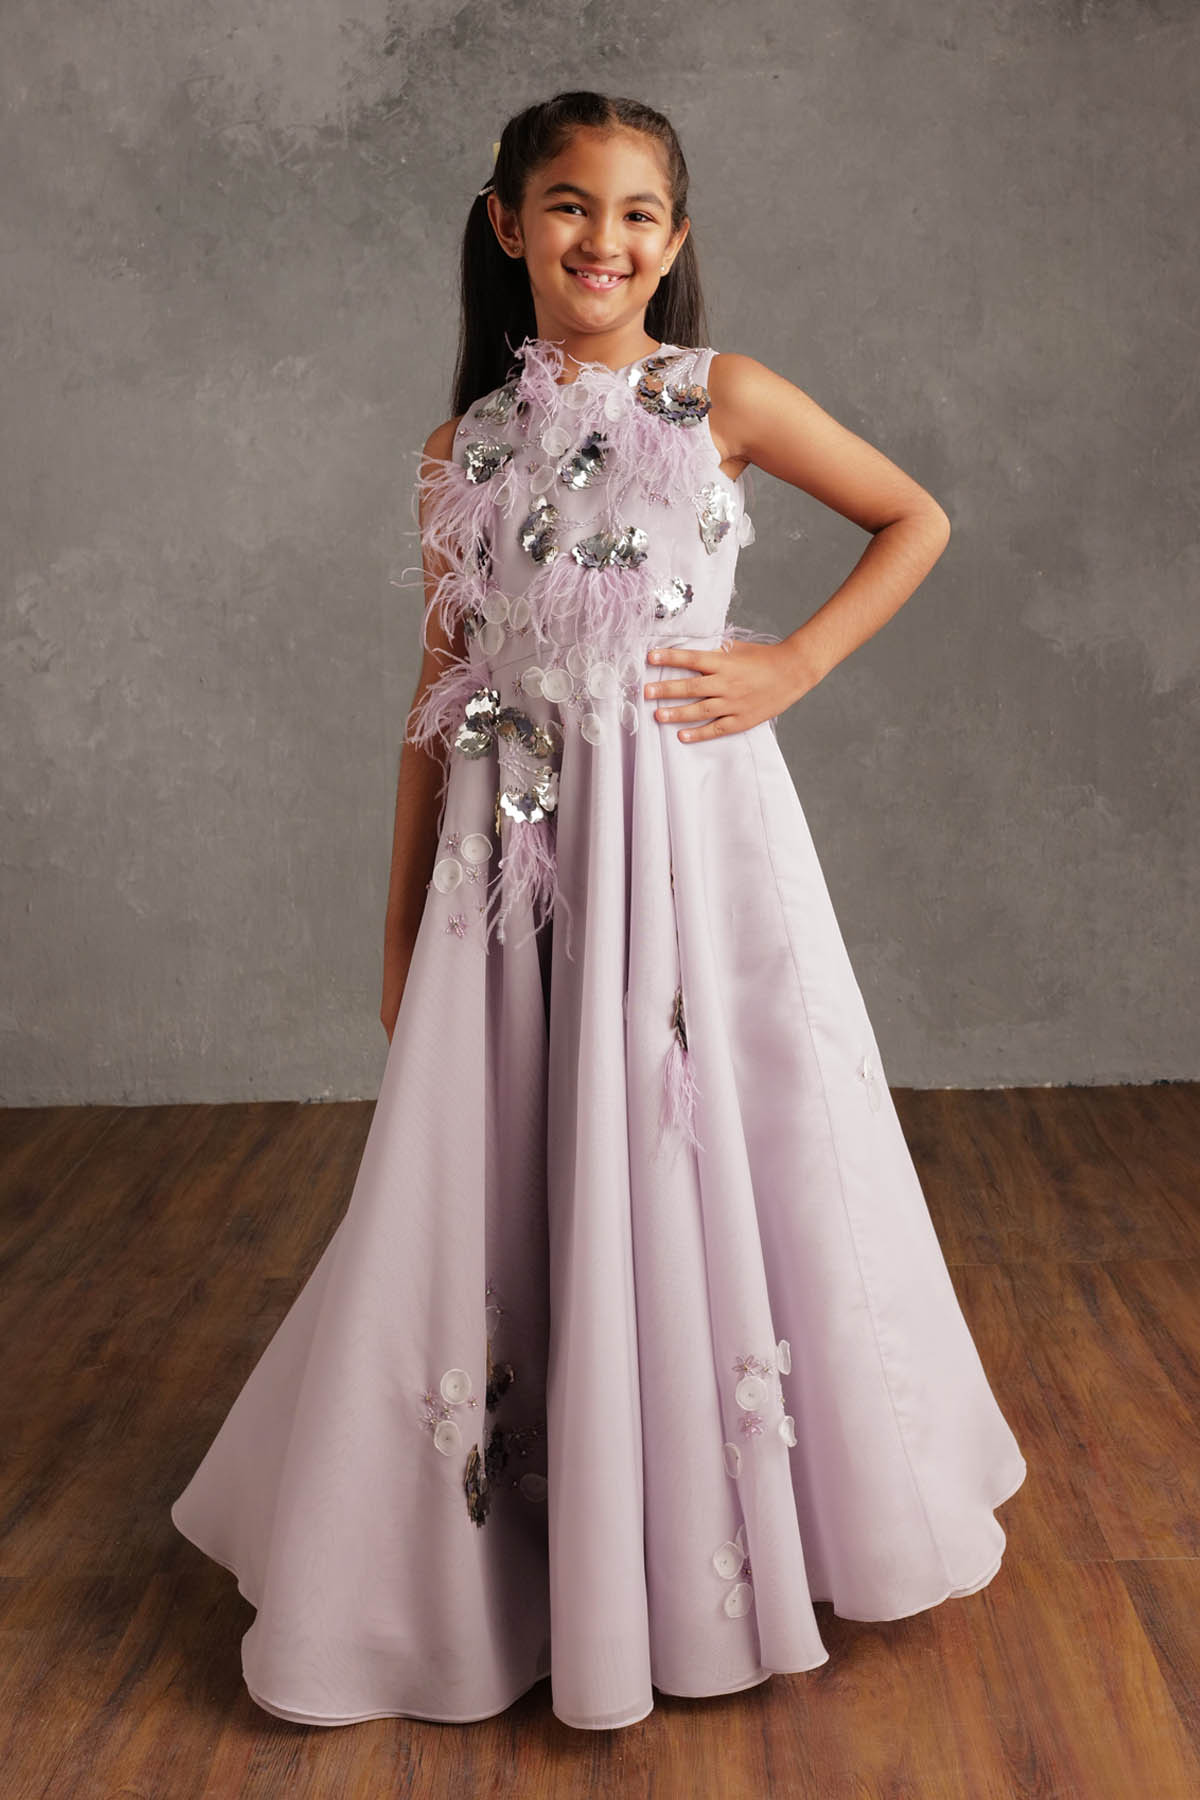 By Not So Serious By Pallavi Mohan Lavender Feather & Petal Dress For Girls Available online at ScrollnShops